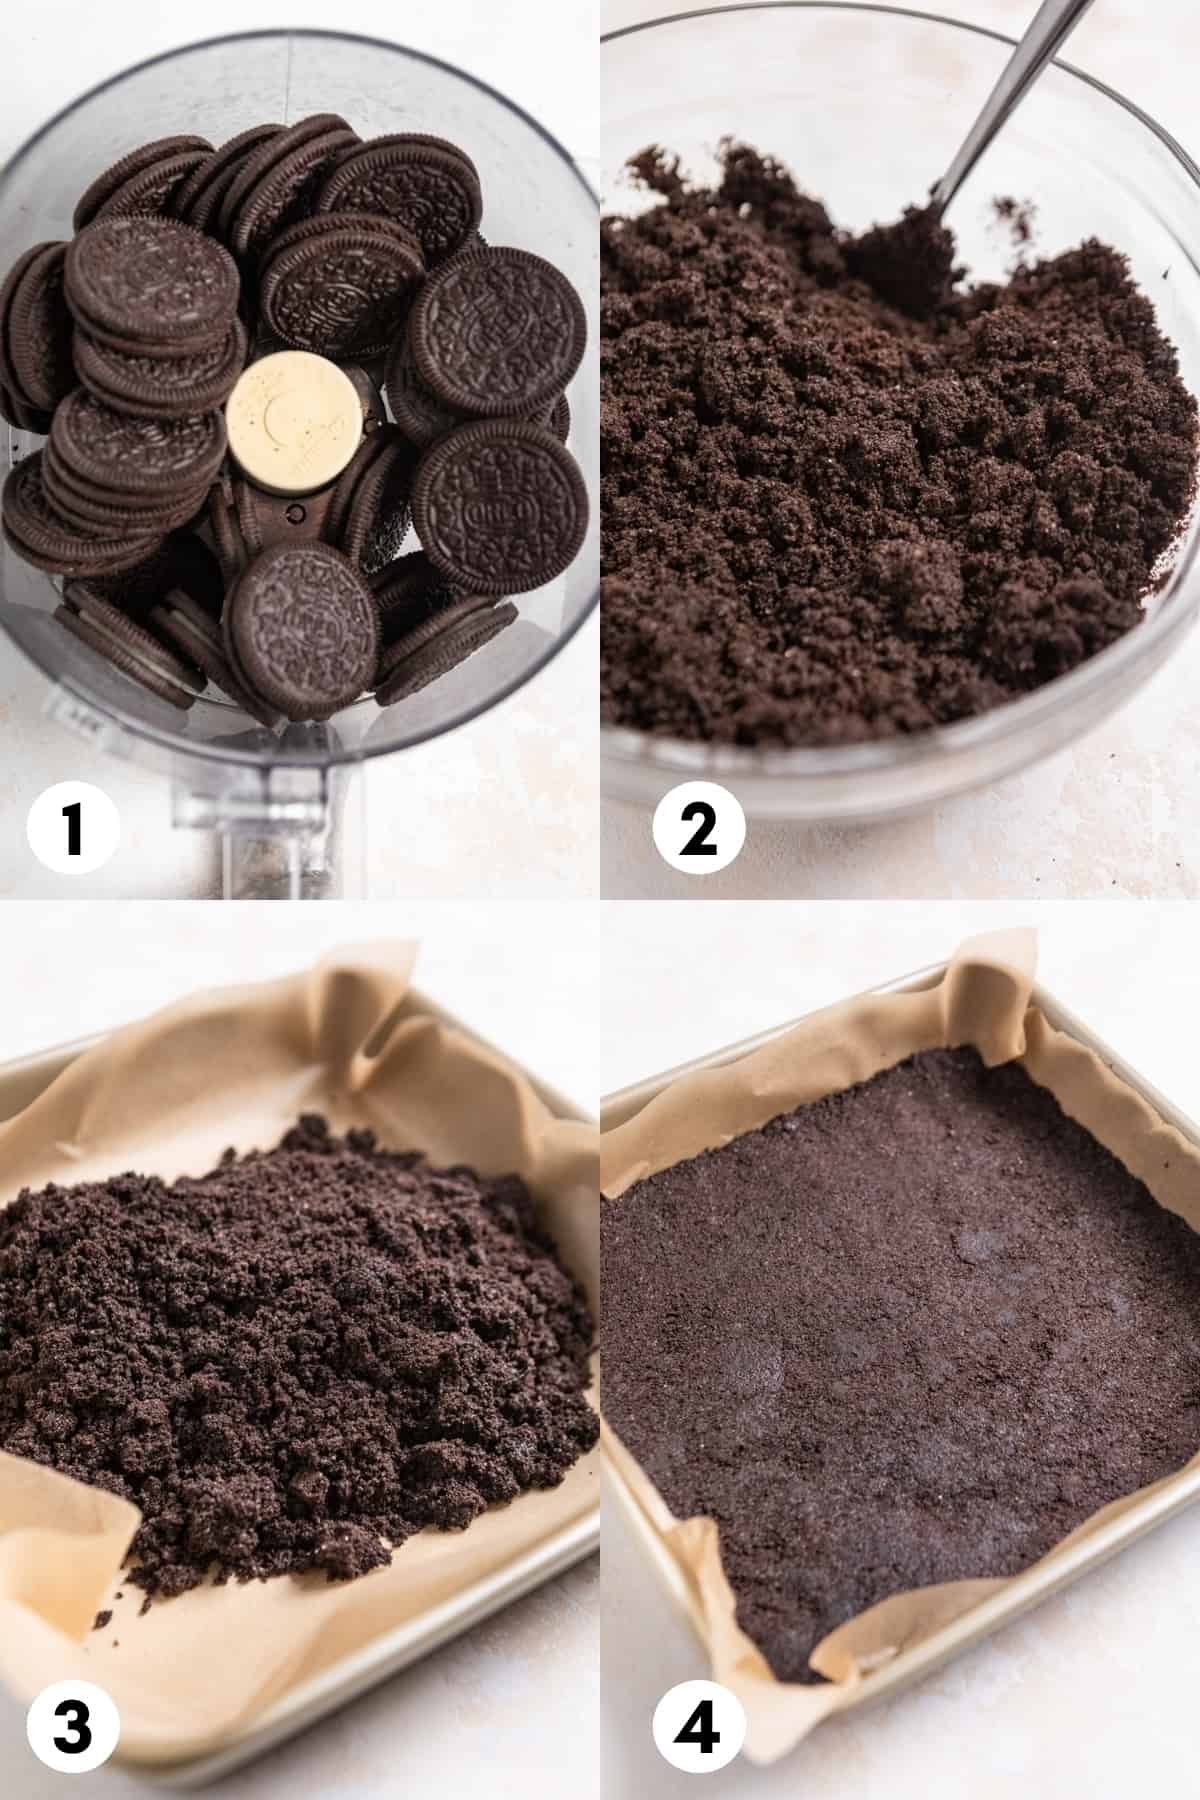 Step by step images to make no bake oreo crust.